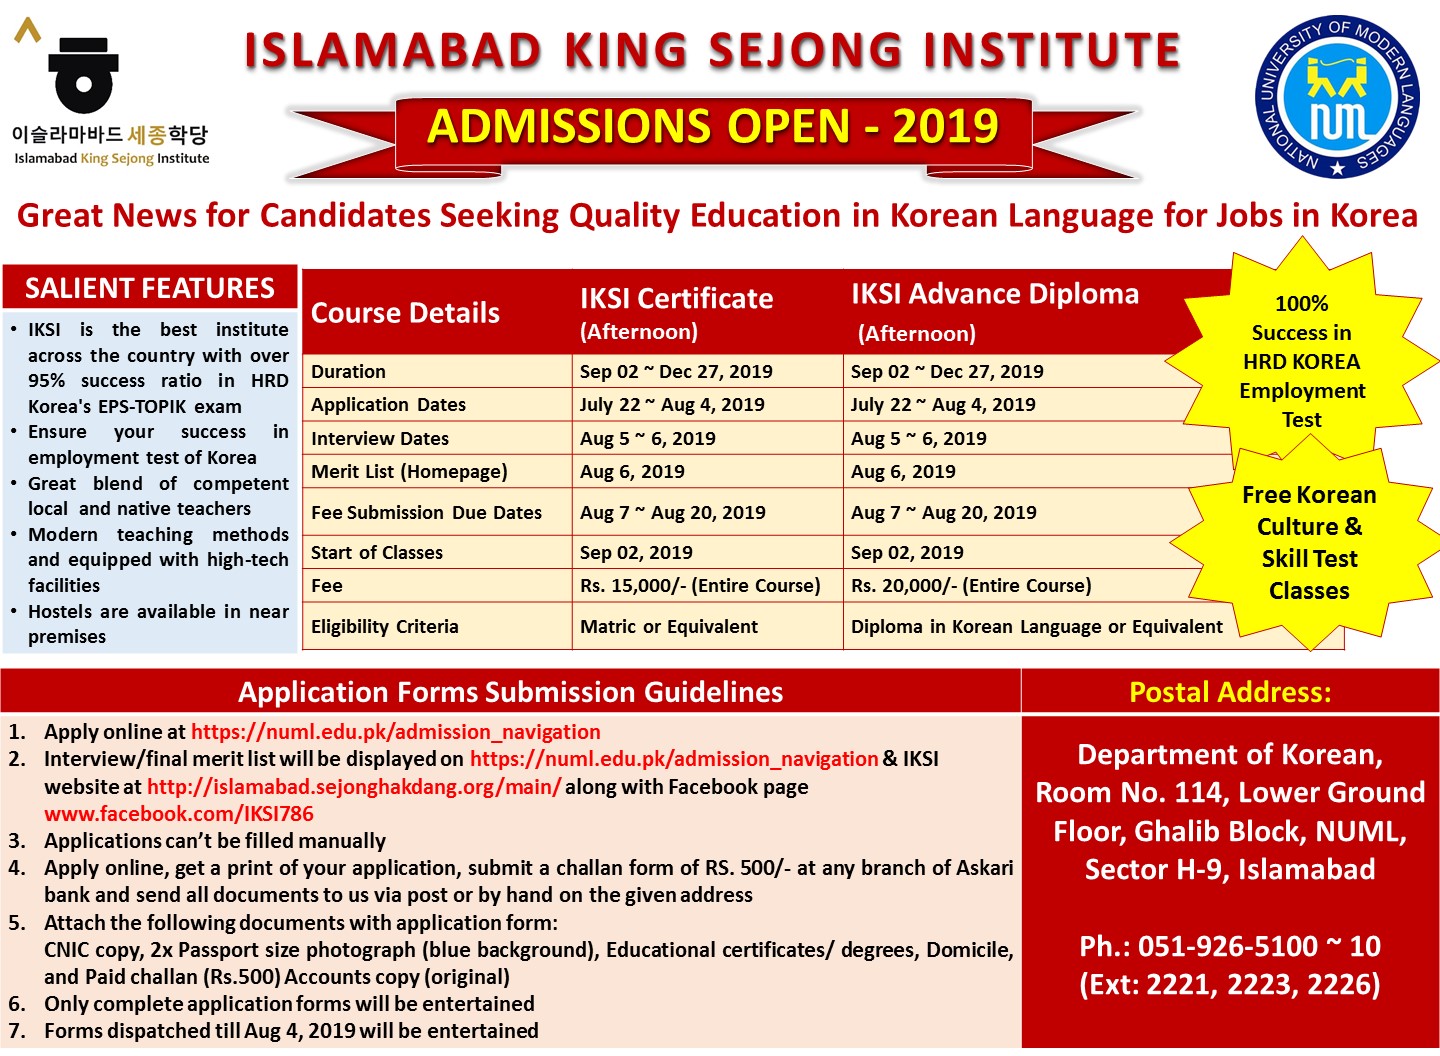 ISLAMABAD KING SEJONG INSTITUTE ADMISSION OPEN